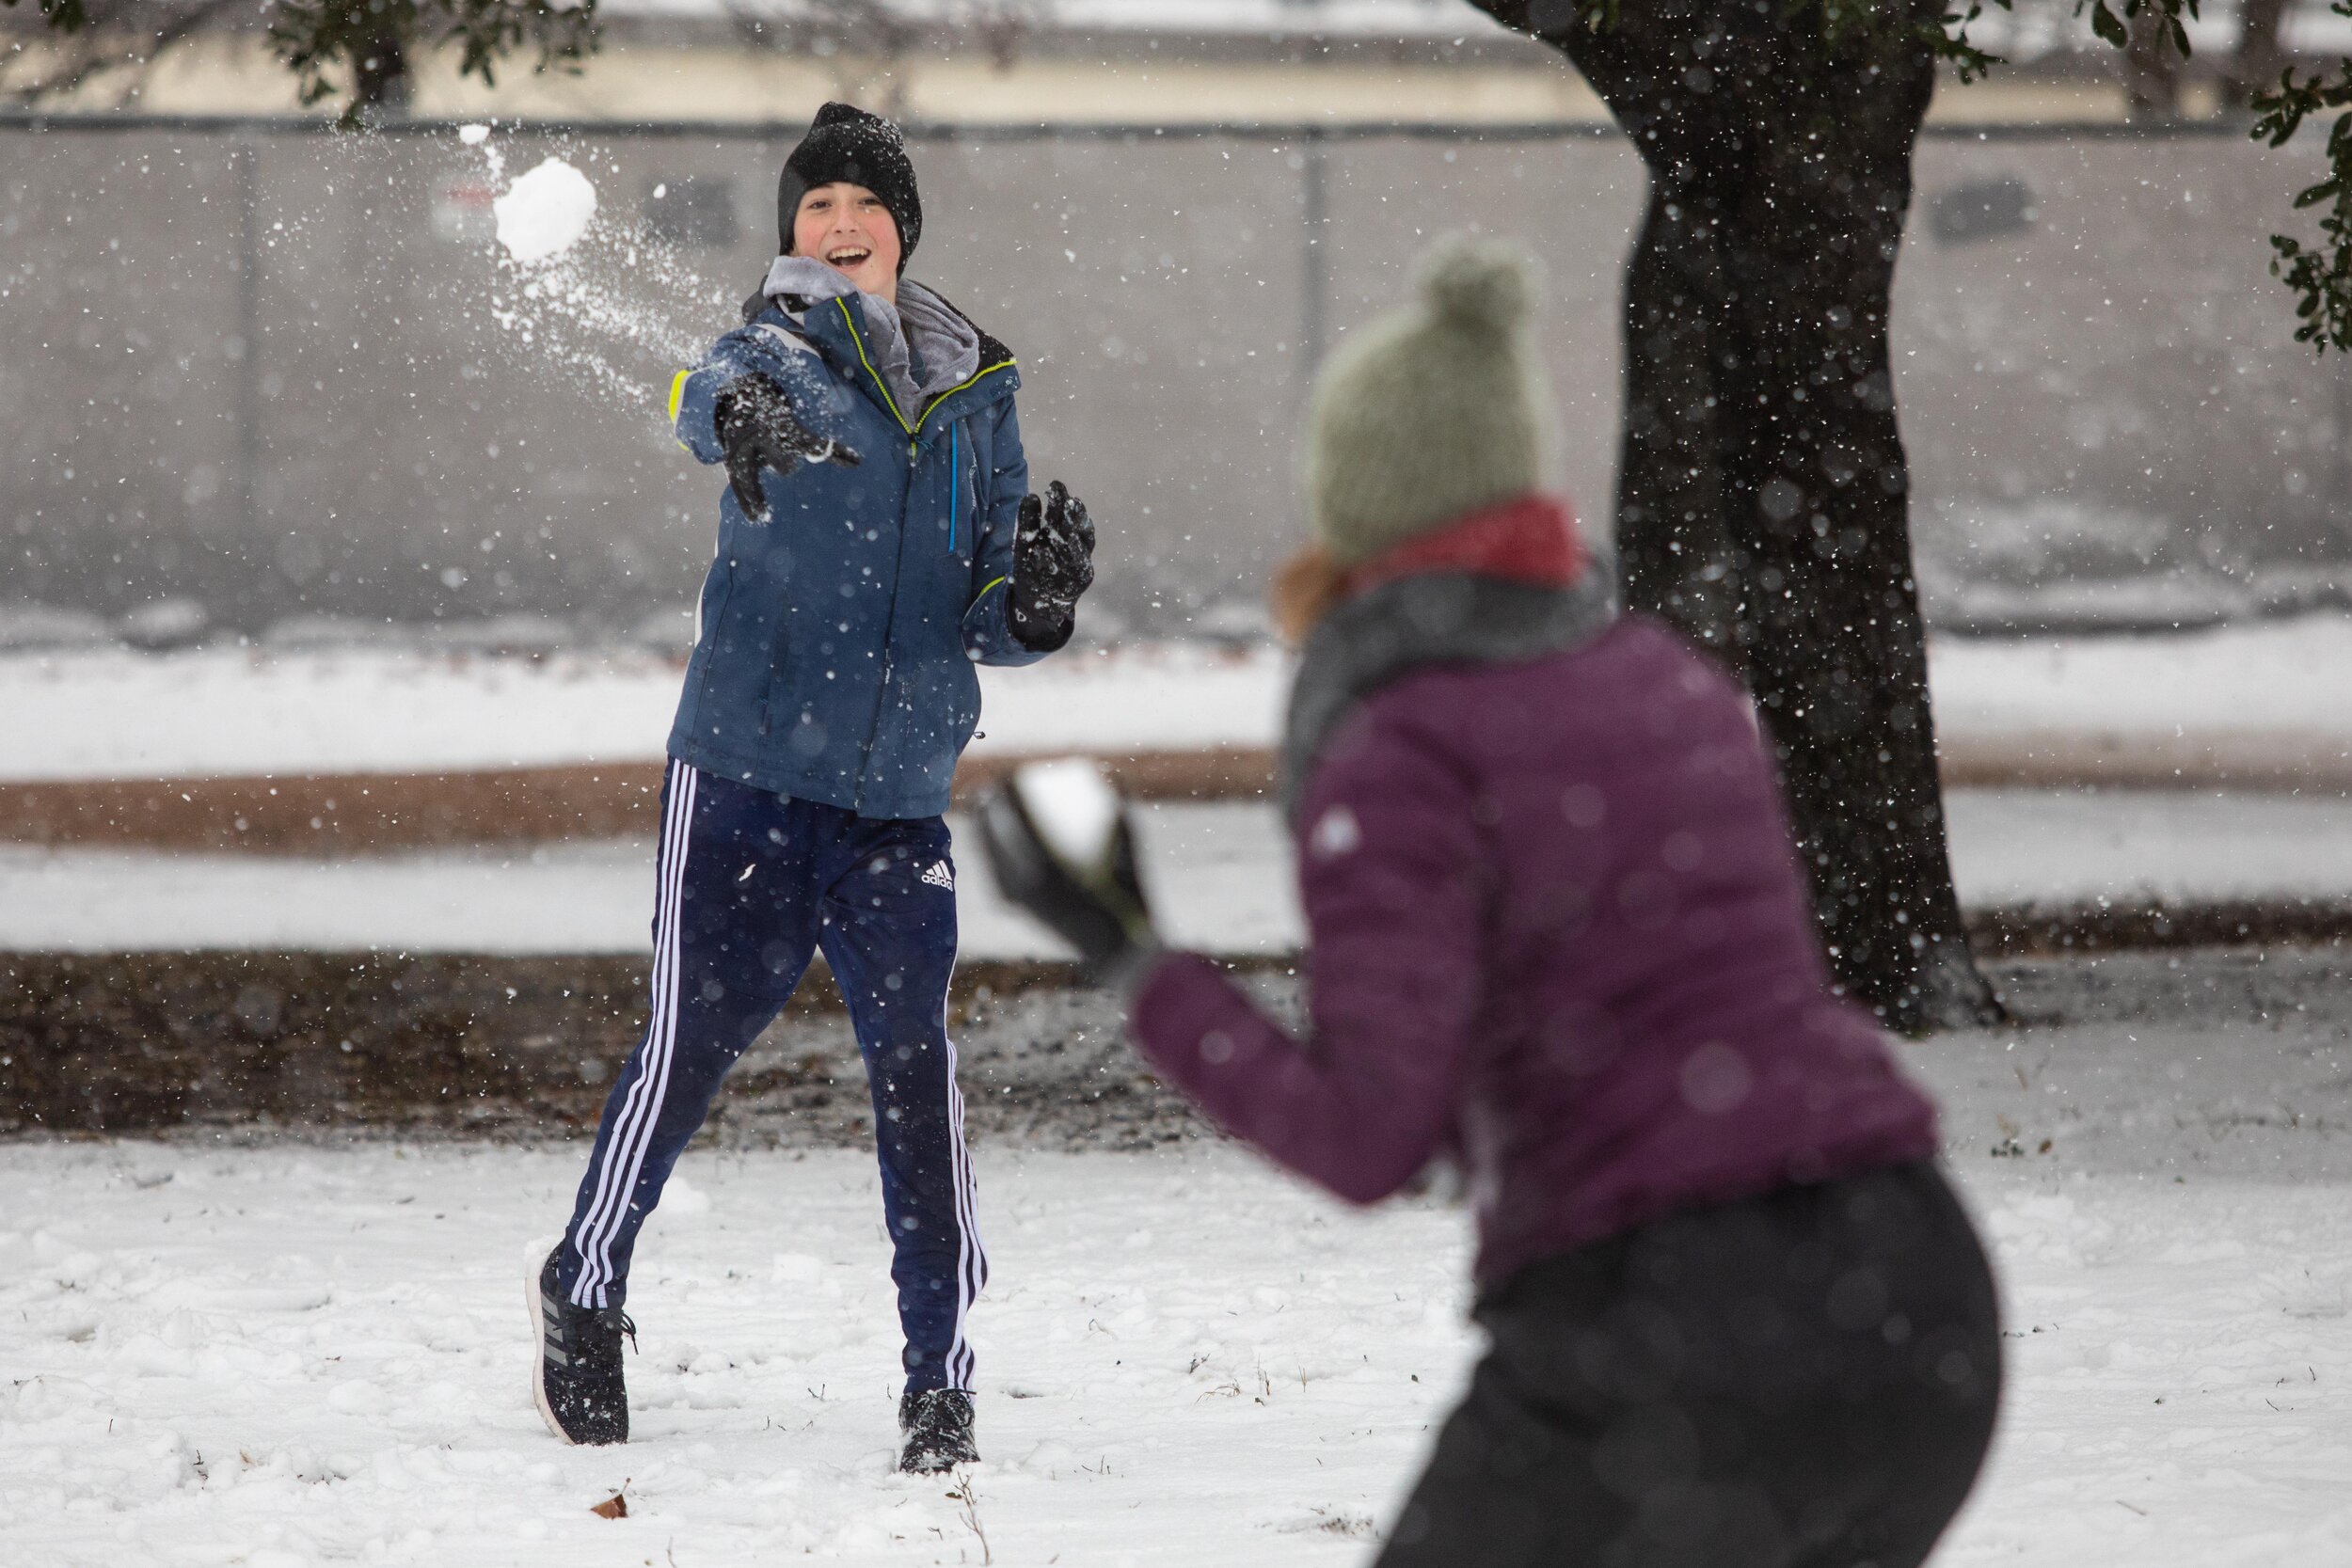  AUSTIN, TX. Jan. 10, 2021. Asher (left) throws a snowball at Rebecca Sorenson (right) during their snowball fight on a rare snow day at Brentwood Neighborhood Park.  